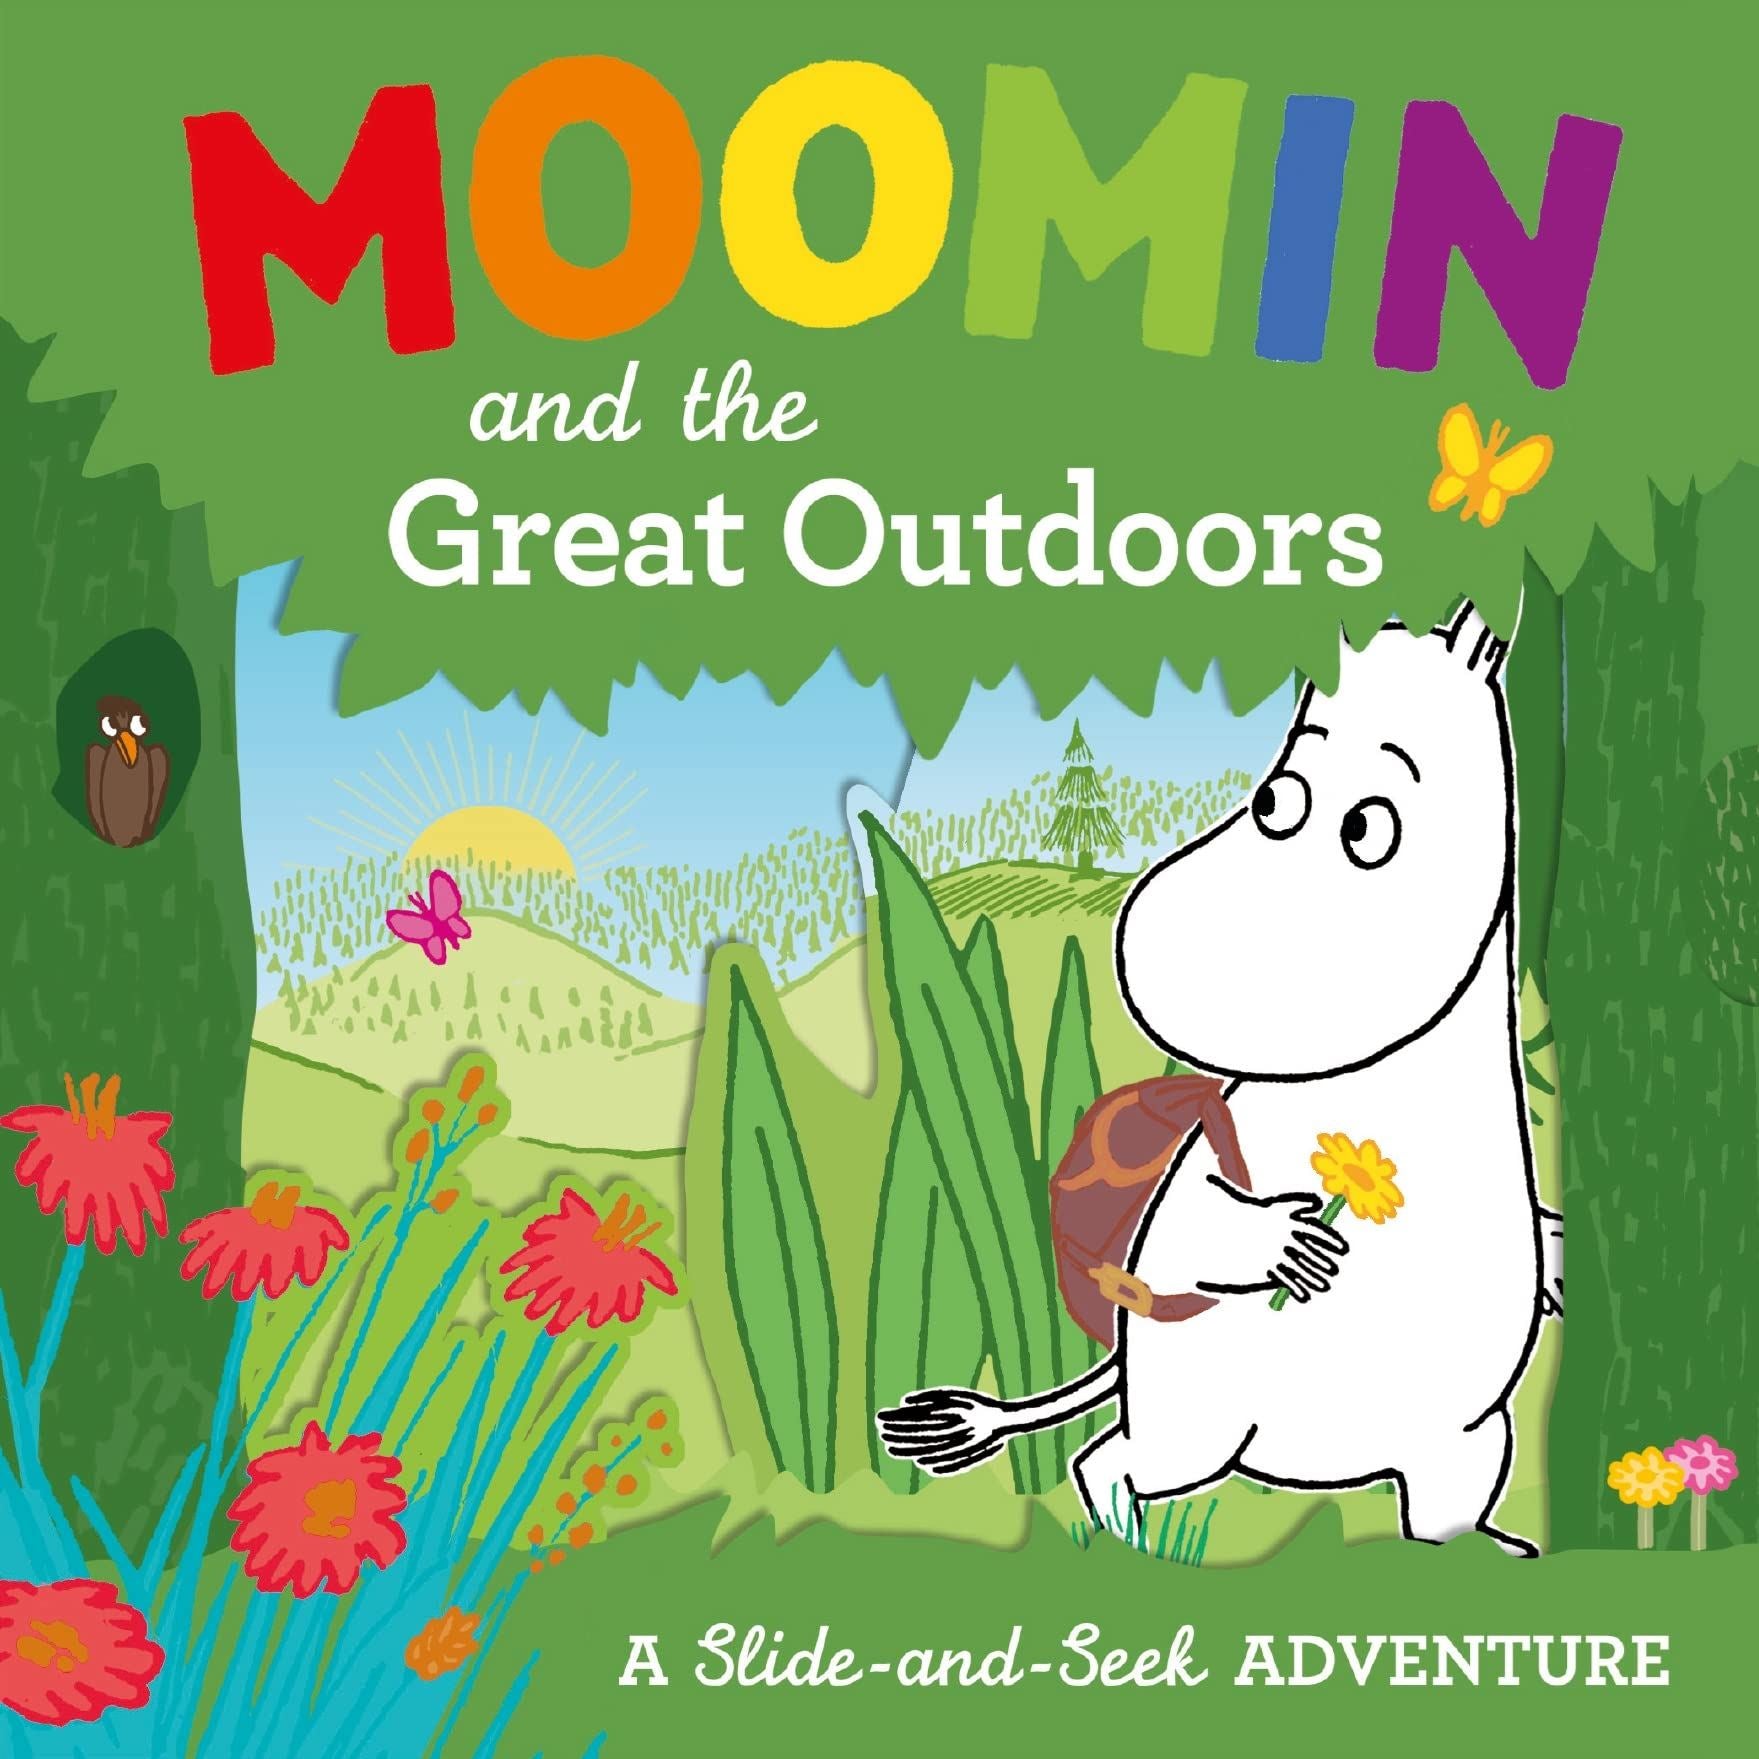 Moomin & The Great Outdoors